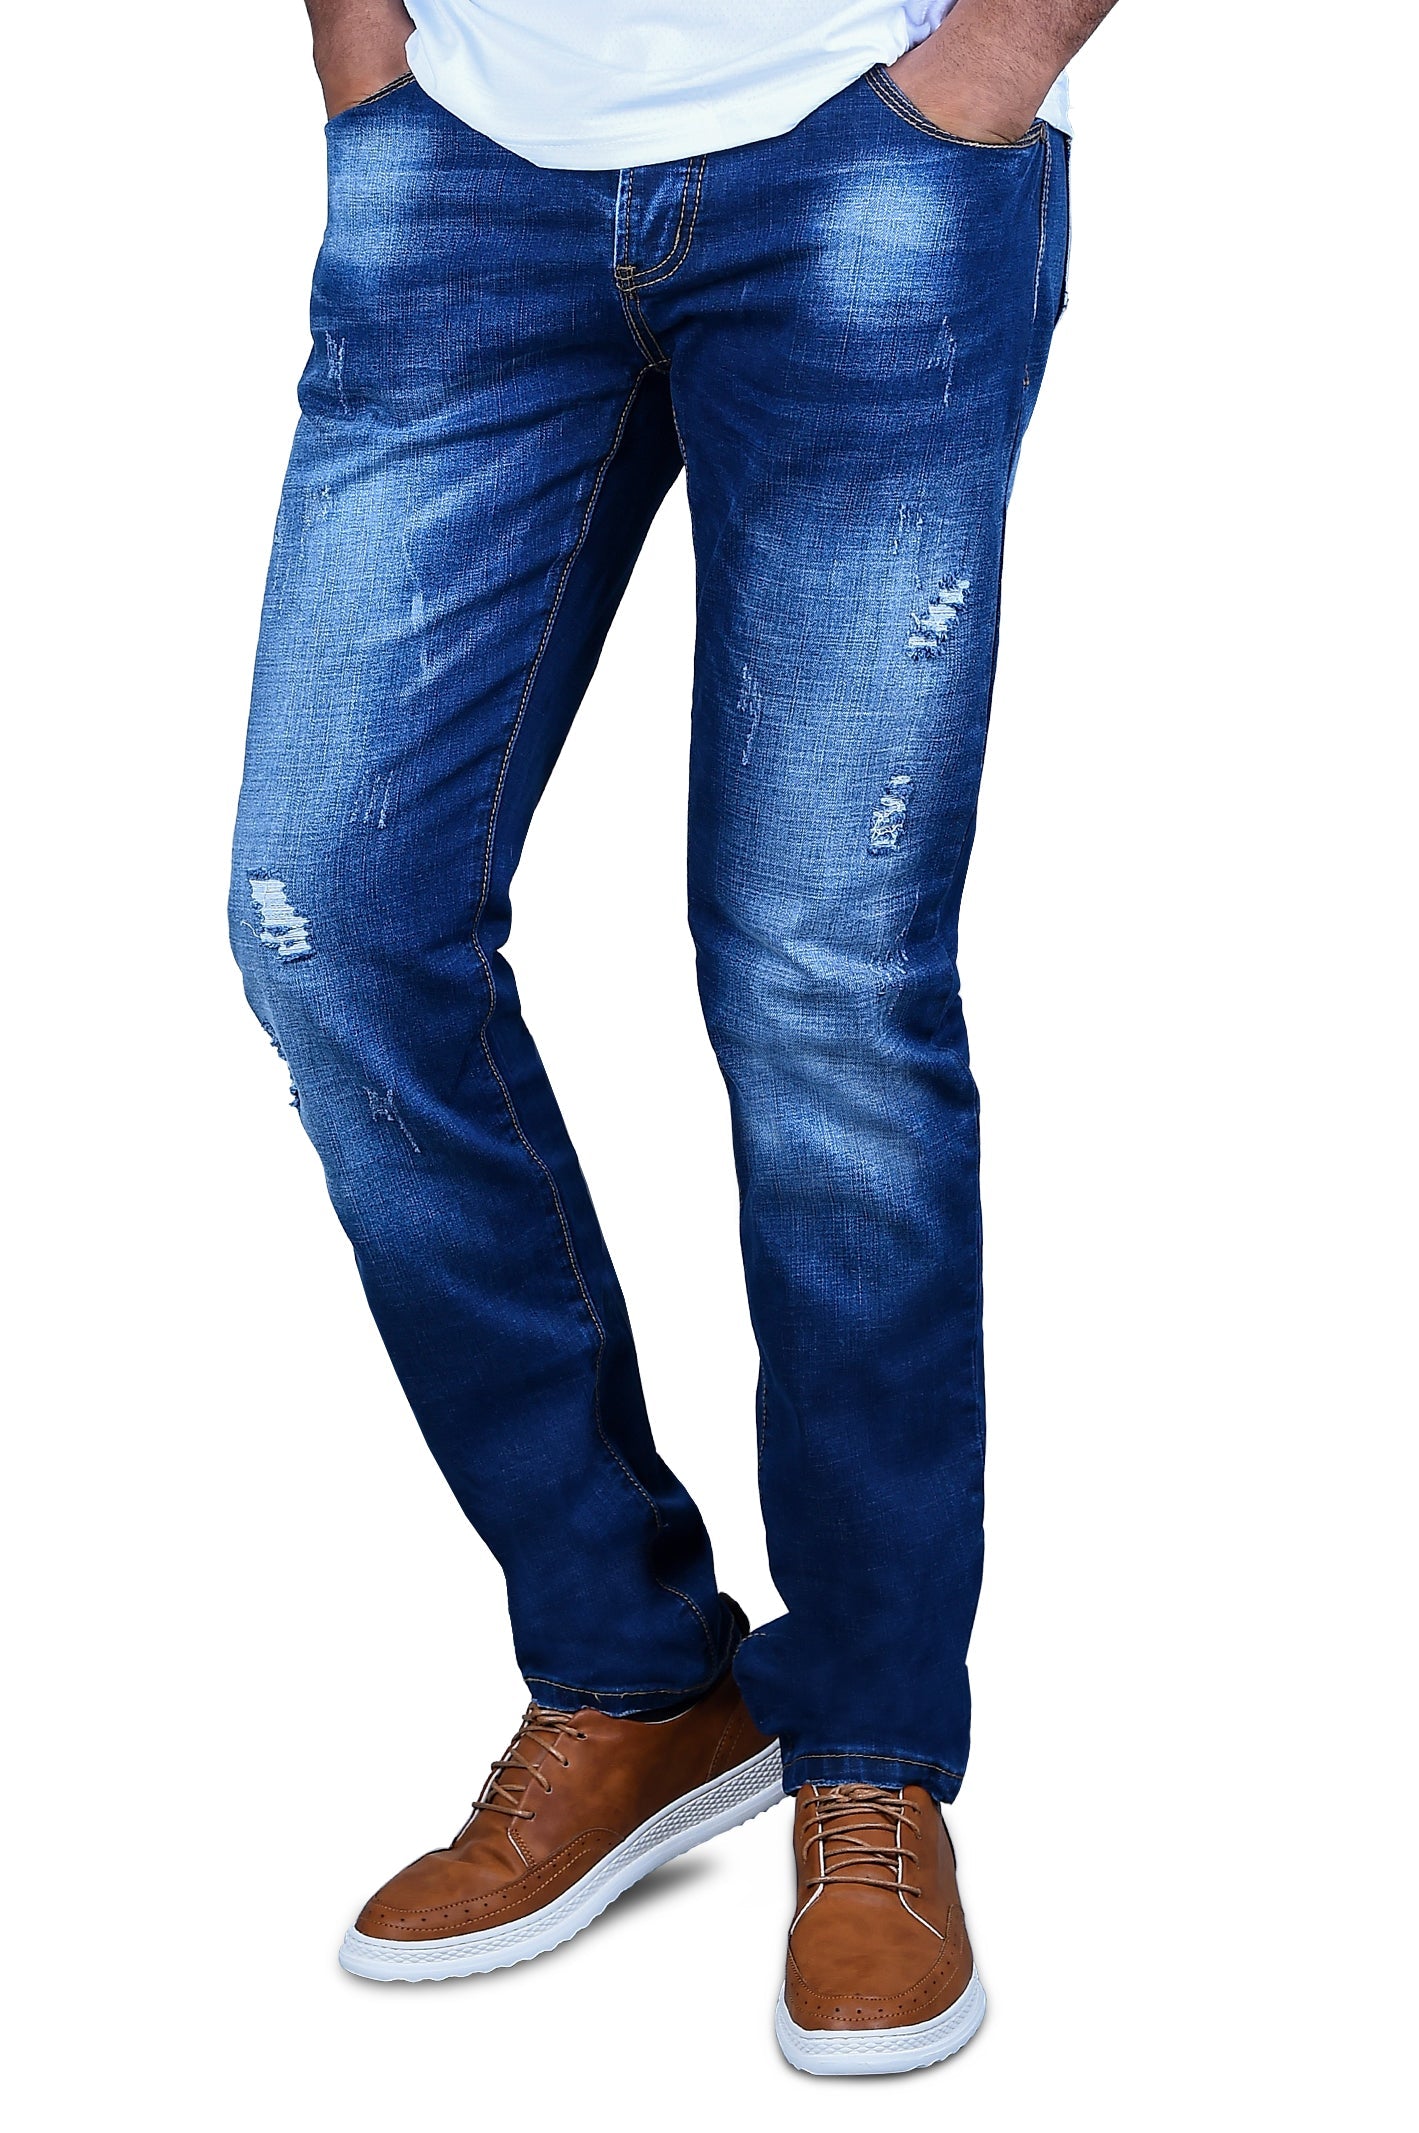 Casual Jeans in Blue SKU: BJ2719-BLUE - Diners